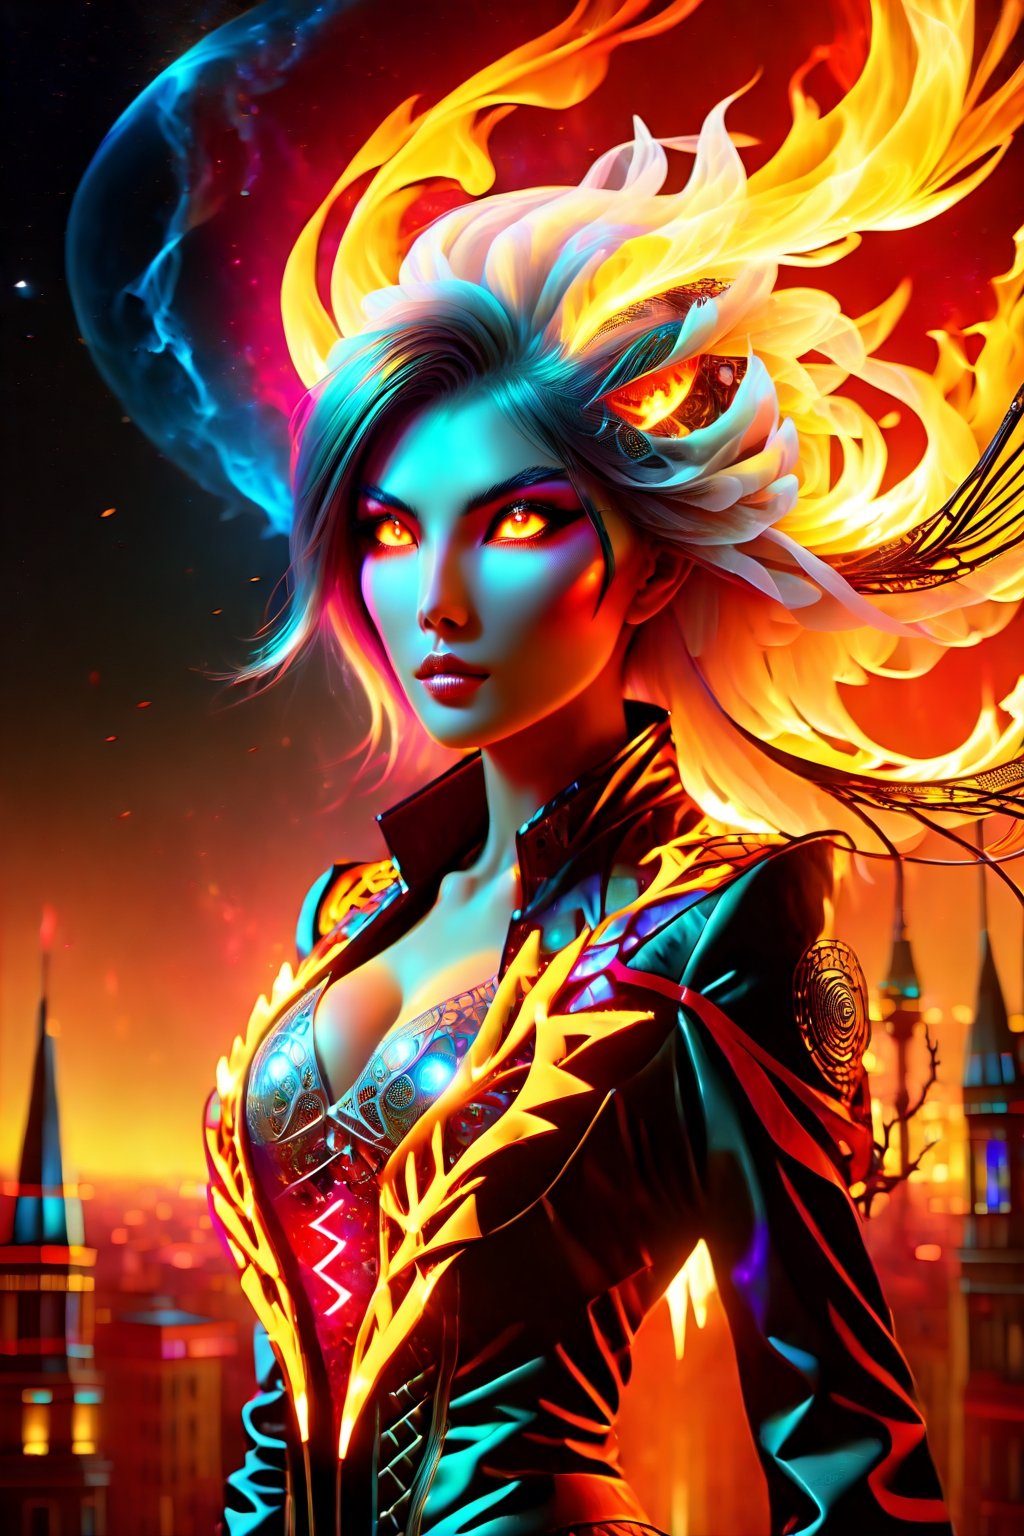 face of a beutiful girl, beutiful big lips, Beutiful female phonix rises from the ashes,sexy outfit of flames,  destrucktion around him, bright strong colors, perfection, sexy, female silhouet, fire spread,gloom, ((female)) ((masterpiece, best quality)), ultra detail, 8k, split diopter, ((Vaporwave aesthetic)), detailed background, (Anime Rage pose), anime style, realistic, photorealistic,(body:1.3), connecting, (sharp colors:1.3), (Infrared:1.2), ultra detailed, ((ultra sharp)), (surrealism:1.4), (disturbing:0.8), (full torso), (:1.2), ((intricate details)), dynamic pose, perfect face, (realistic eyes), perfect eyes, yellow eyes,echmrdrgn,DonM3l3m3nt4lXL, stars in backround sky,stworki, in the style of esao andrews,esao andrews style,shards, 3D SINGLE TEXT,veropeso,DonMB4nsh33XL ,Apoloniasxmasbox